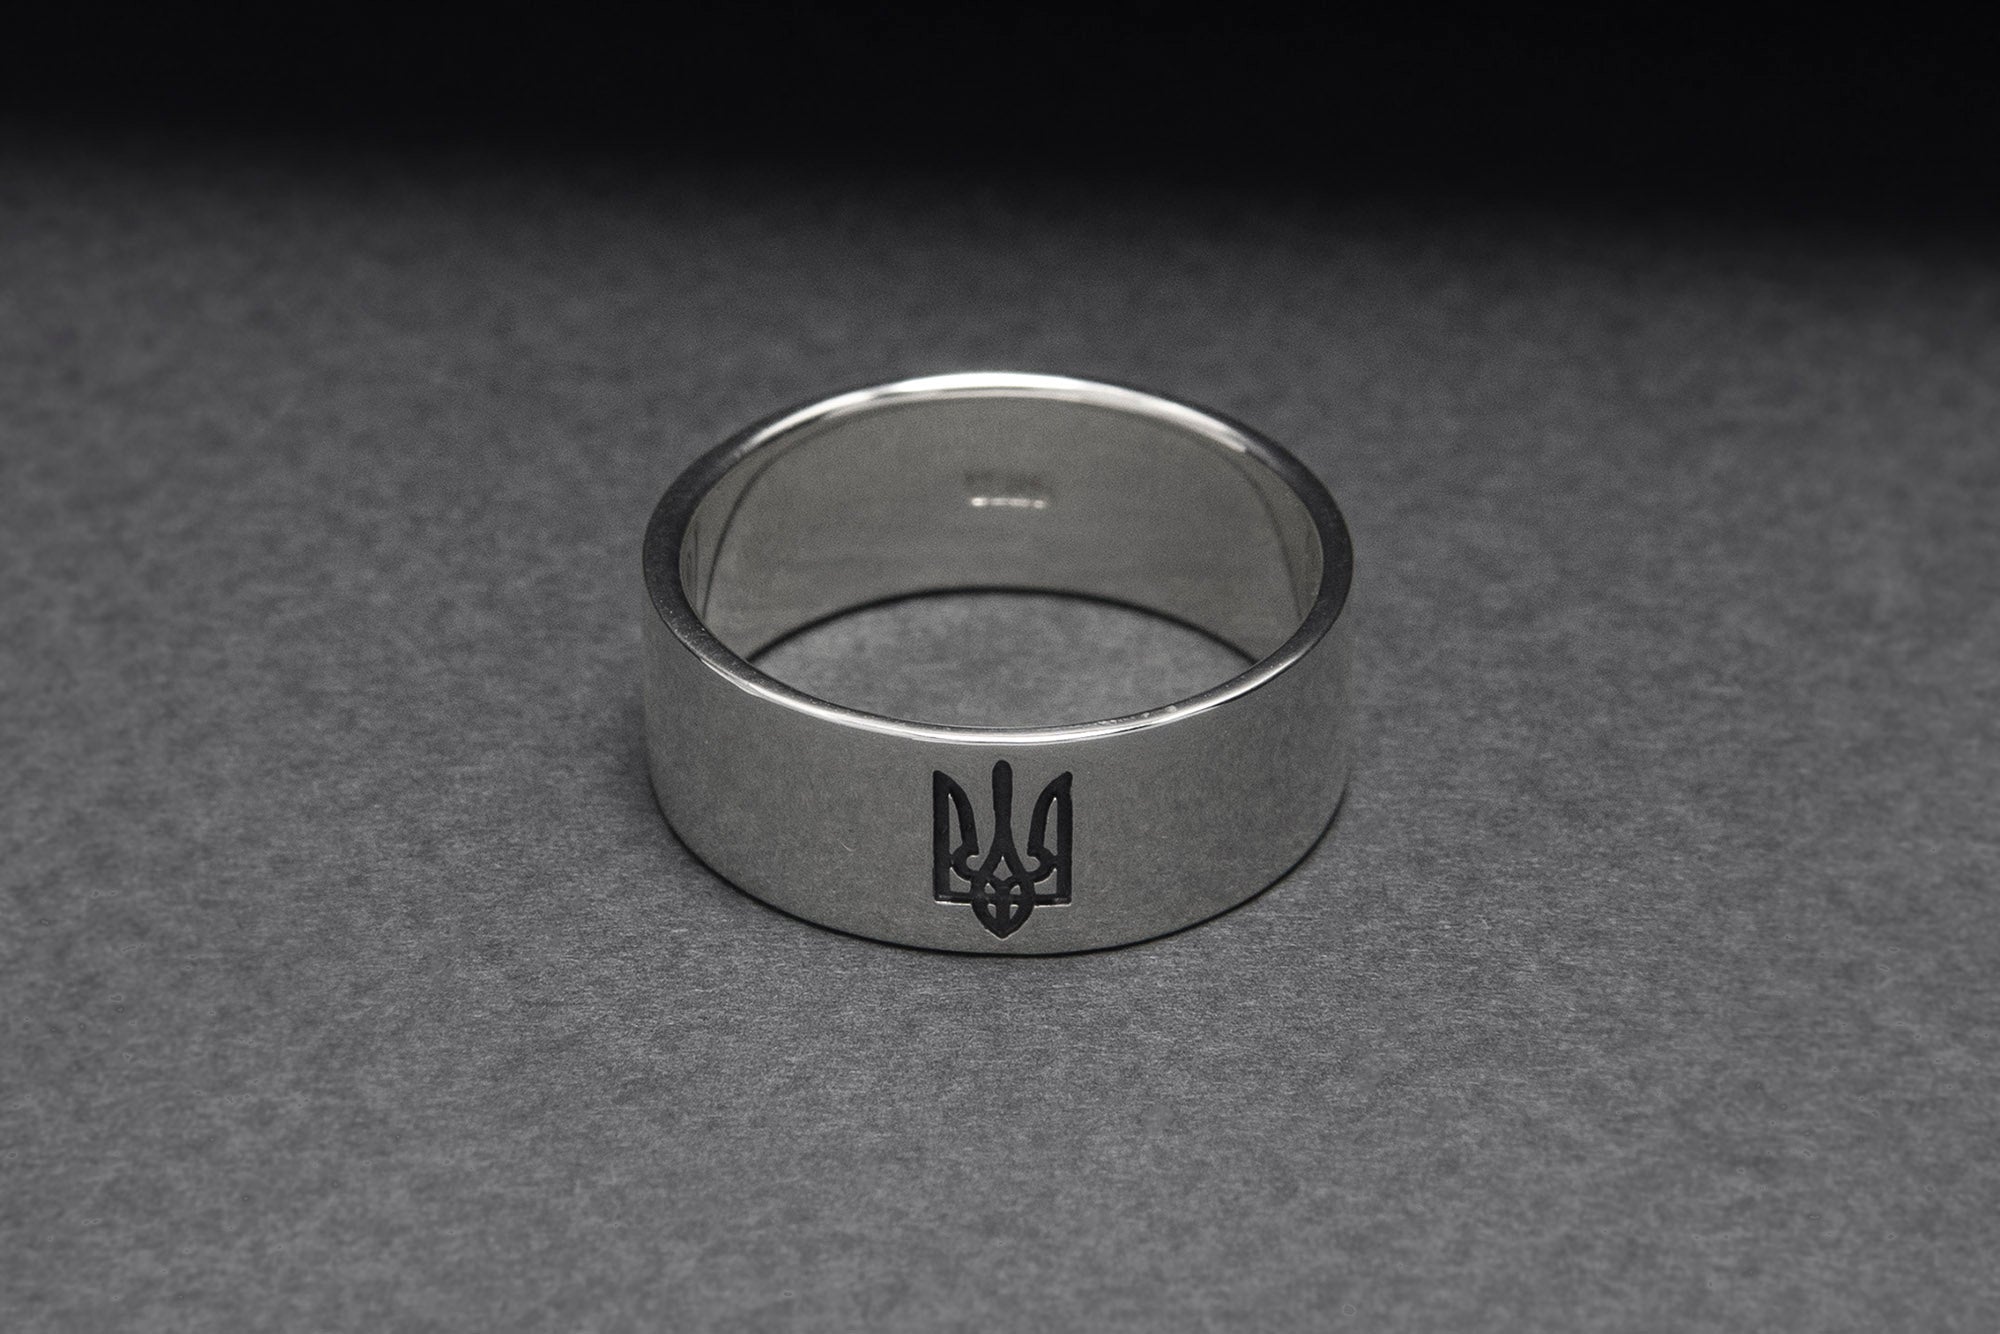 Sterling Smooth Silver Ring with Trident, Made in Ukraine Jewelry - vikingworkshop